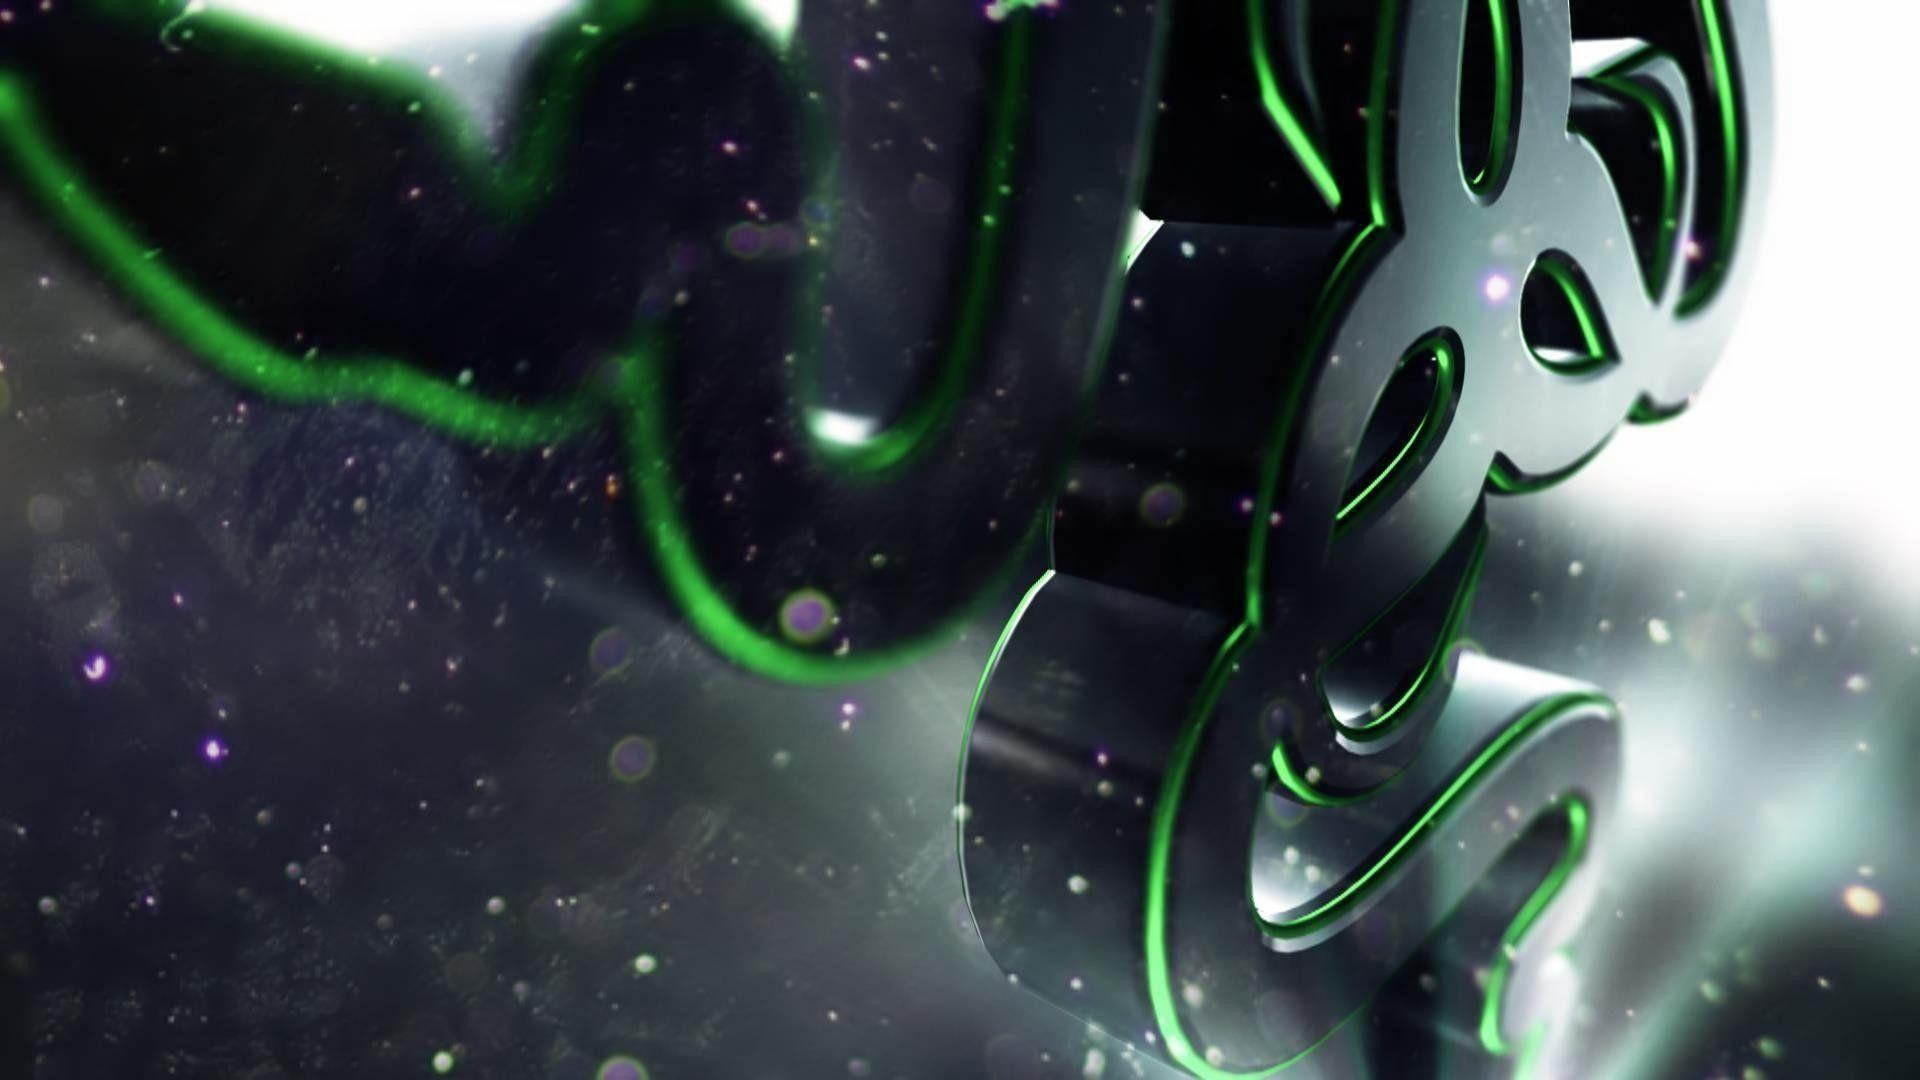 Razer HD Wallpaper and Background Image